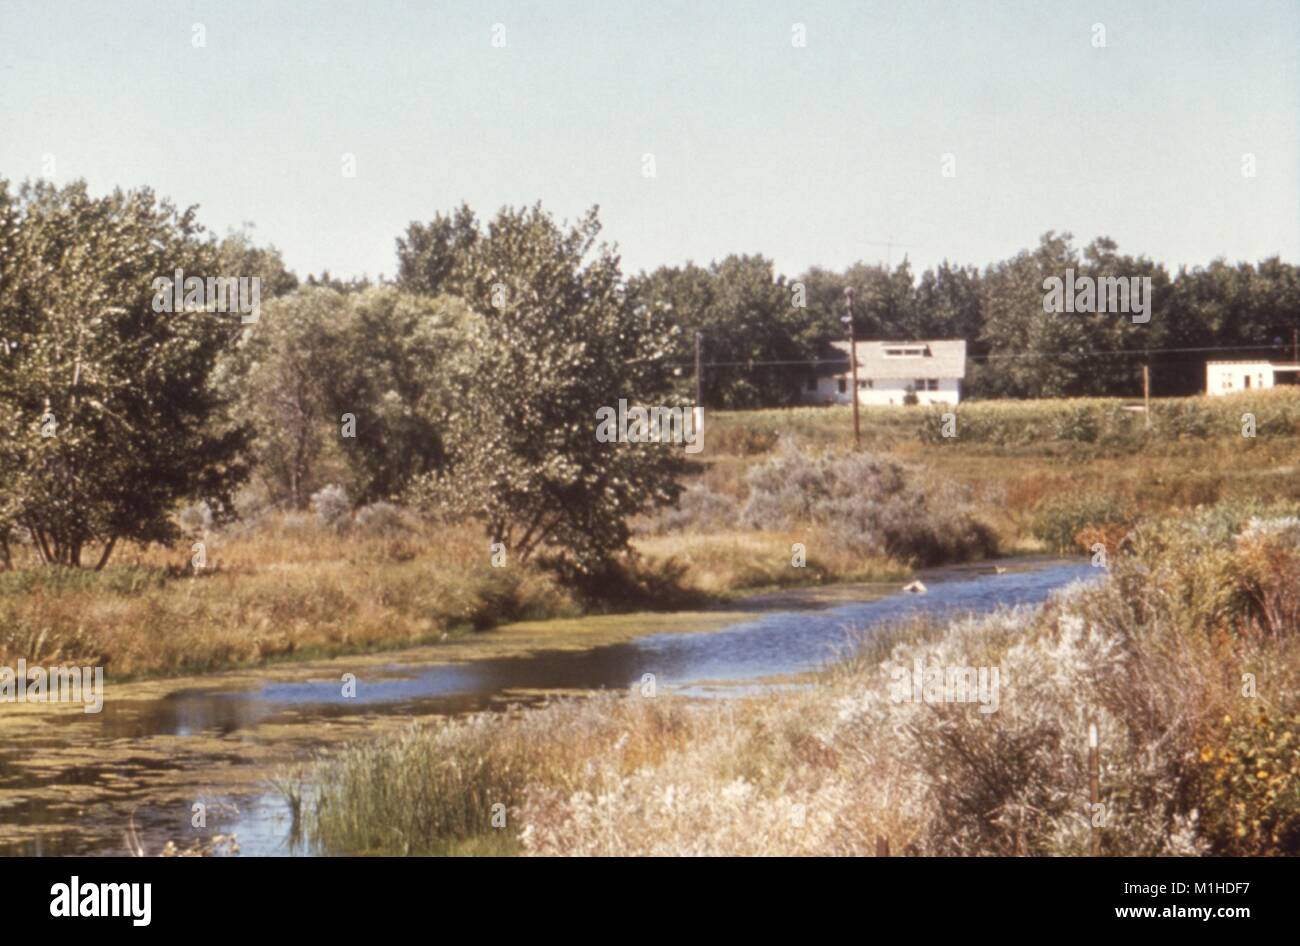 Landscape photograph of a U-shaped oxbow bend in a river, with trees, two white buildings and overhead power lines visible in the background, taken as part of an investigation into vector-borne diseases, Narrows Project, Colorado, 1976, 1976. Image courtesy CDC. () Stock Photo